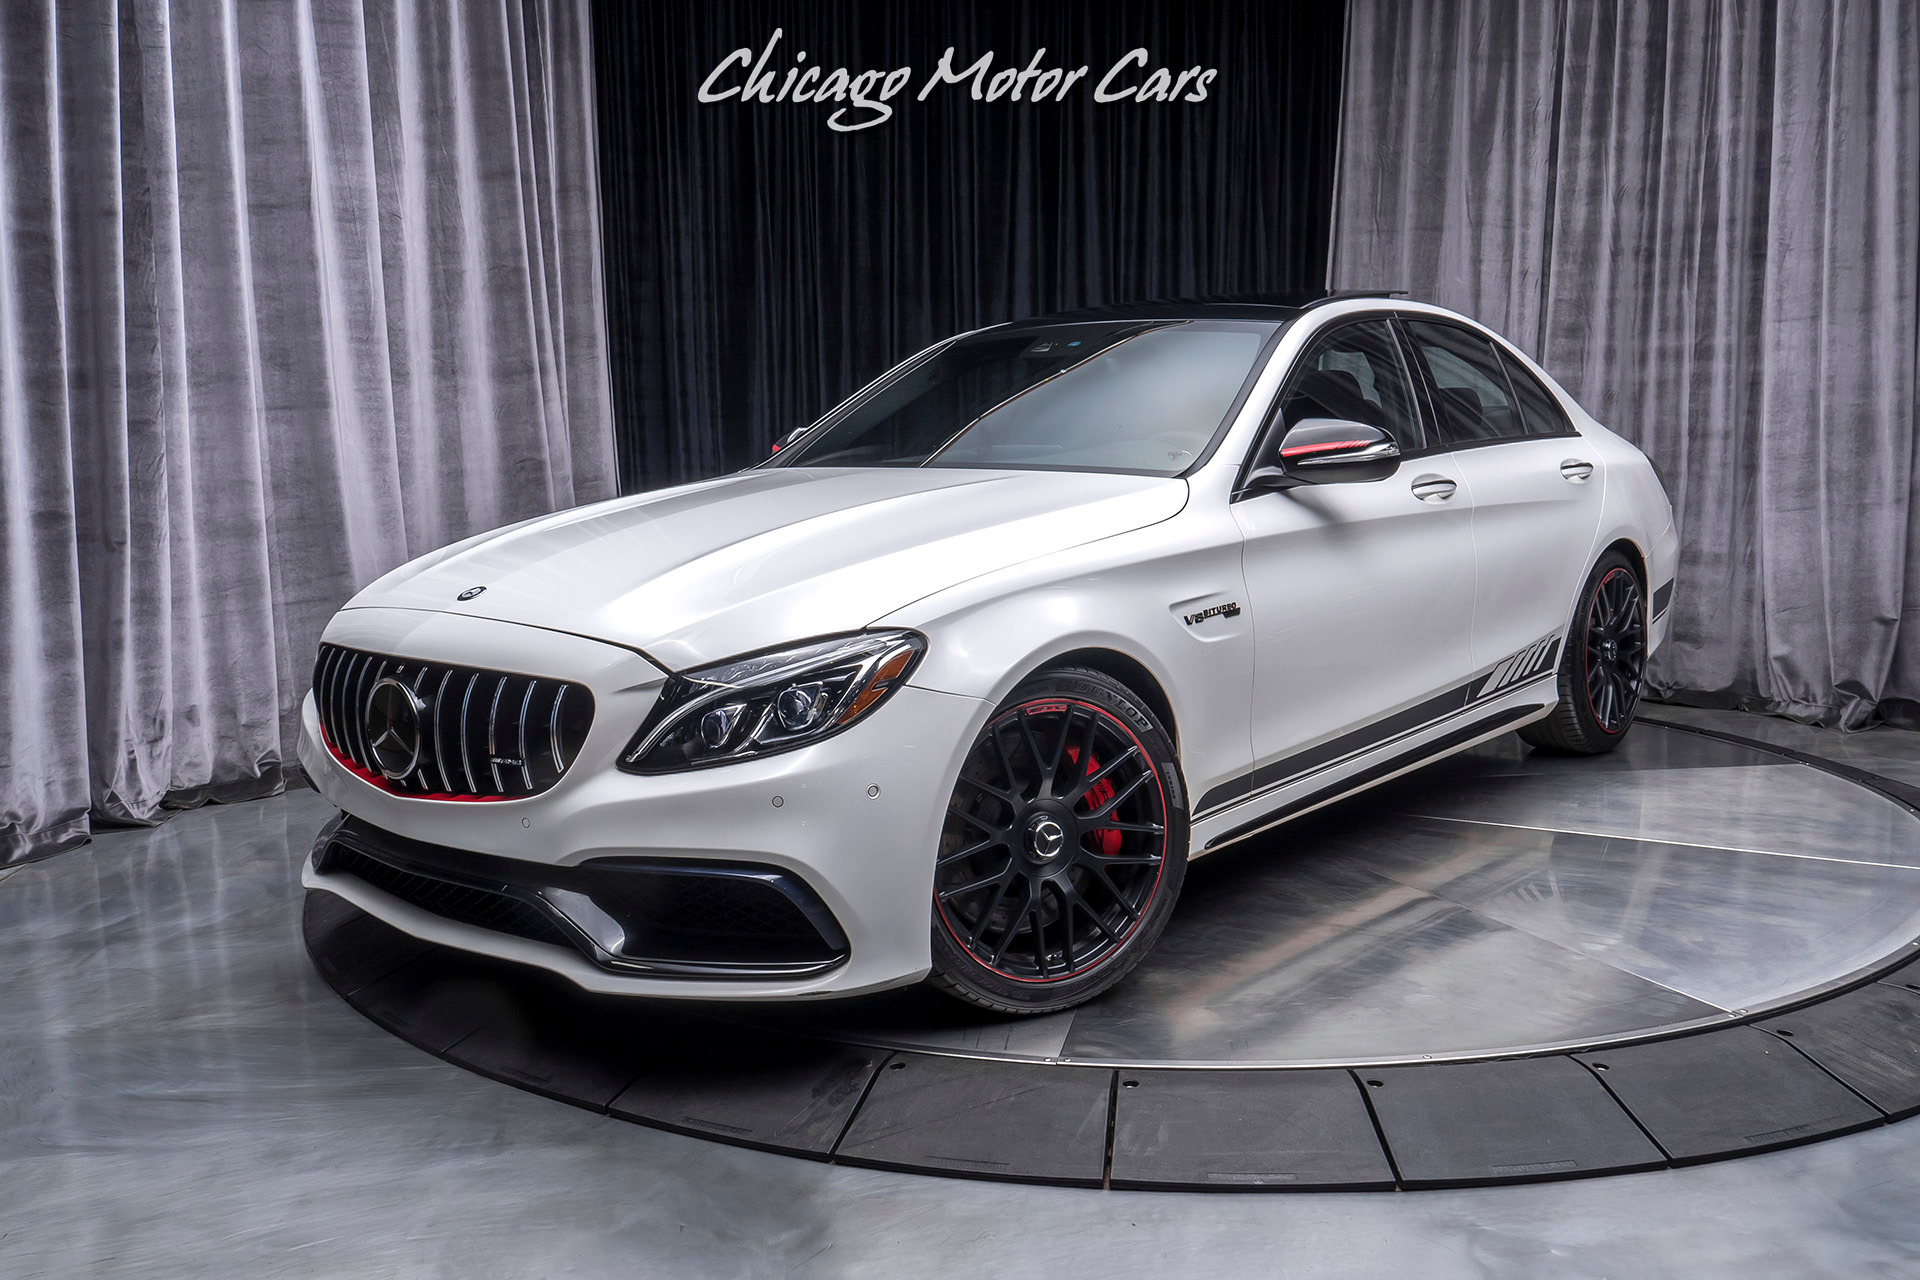 Used-2015-Mercedes-Benz-C63-S-AMG-Edition-One-Sedan-MSRP-86k-EDITION-1-PACKAGE